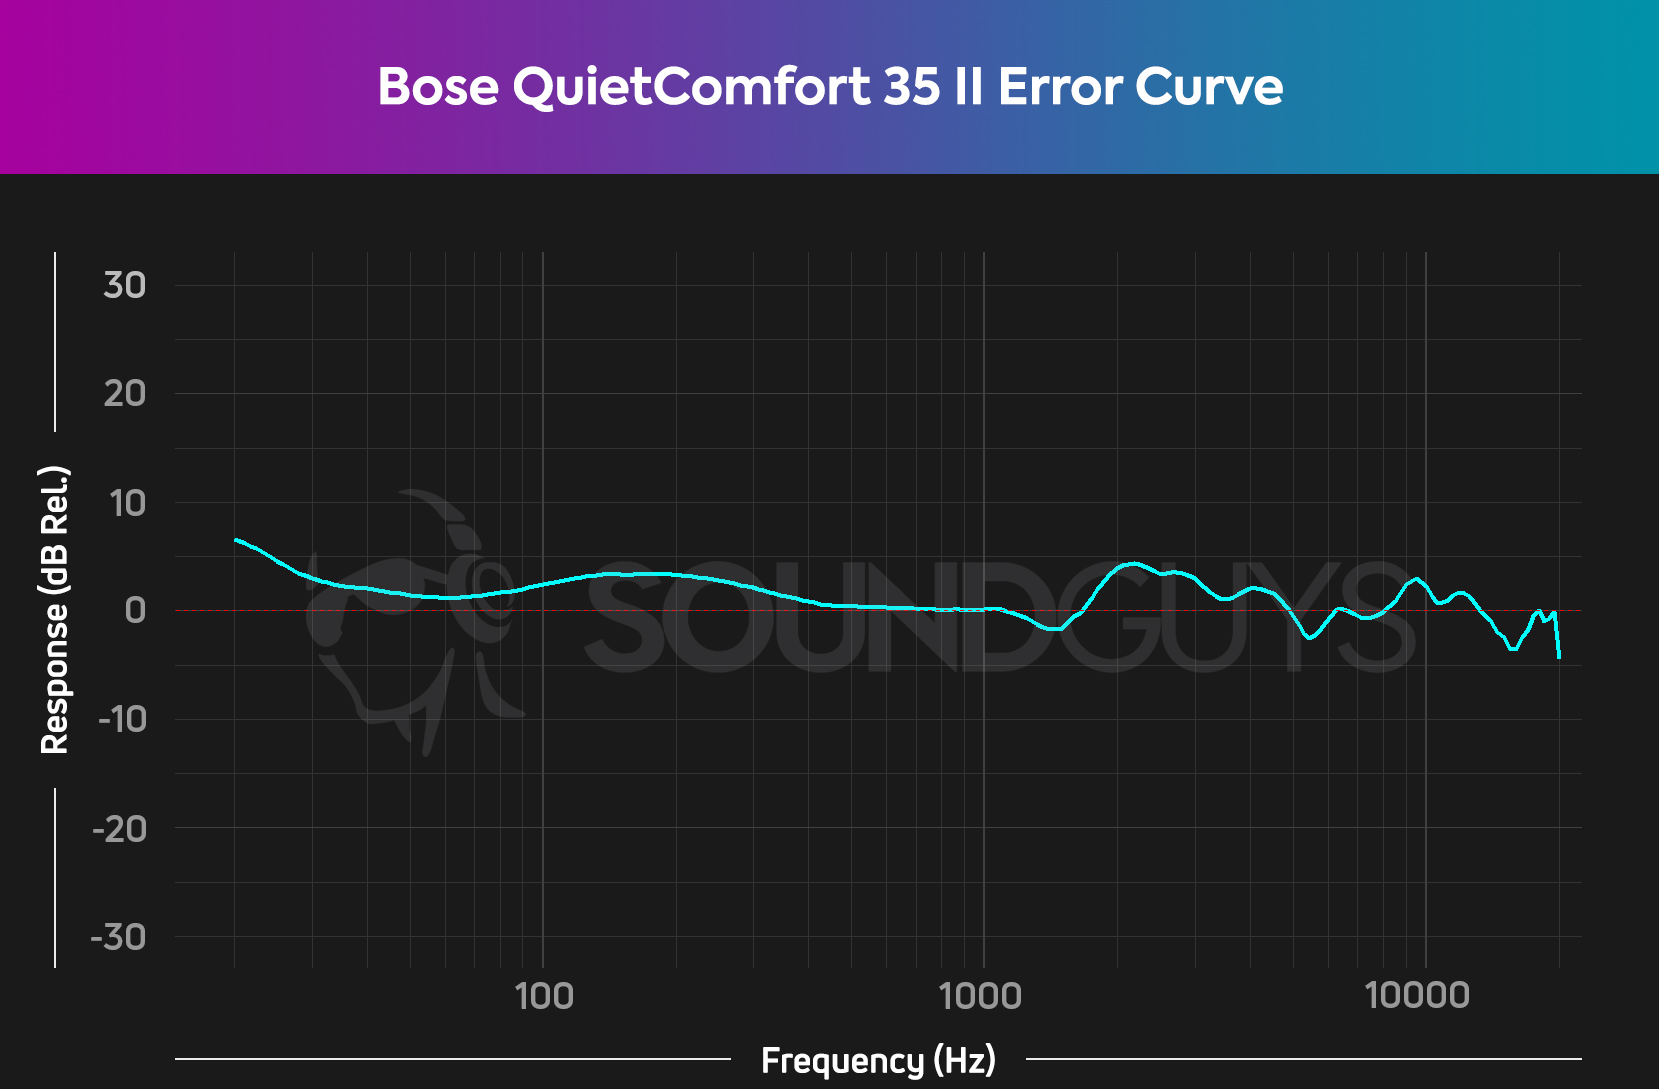 A chart showing the error curve of the Bose QuietComfort 35 II